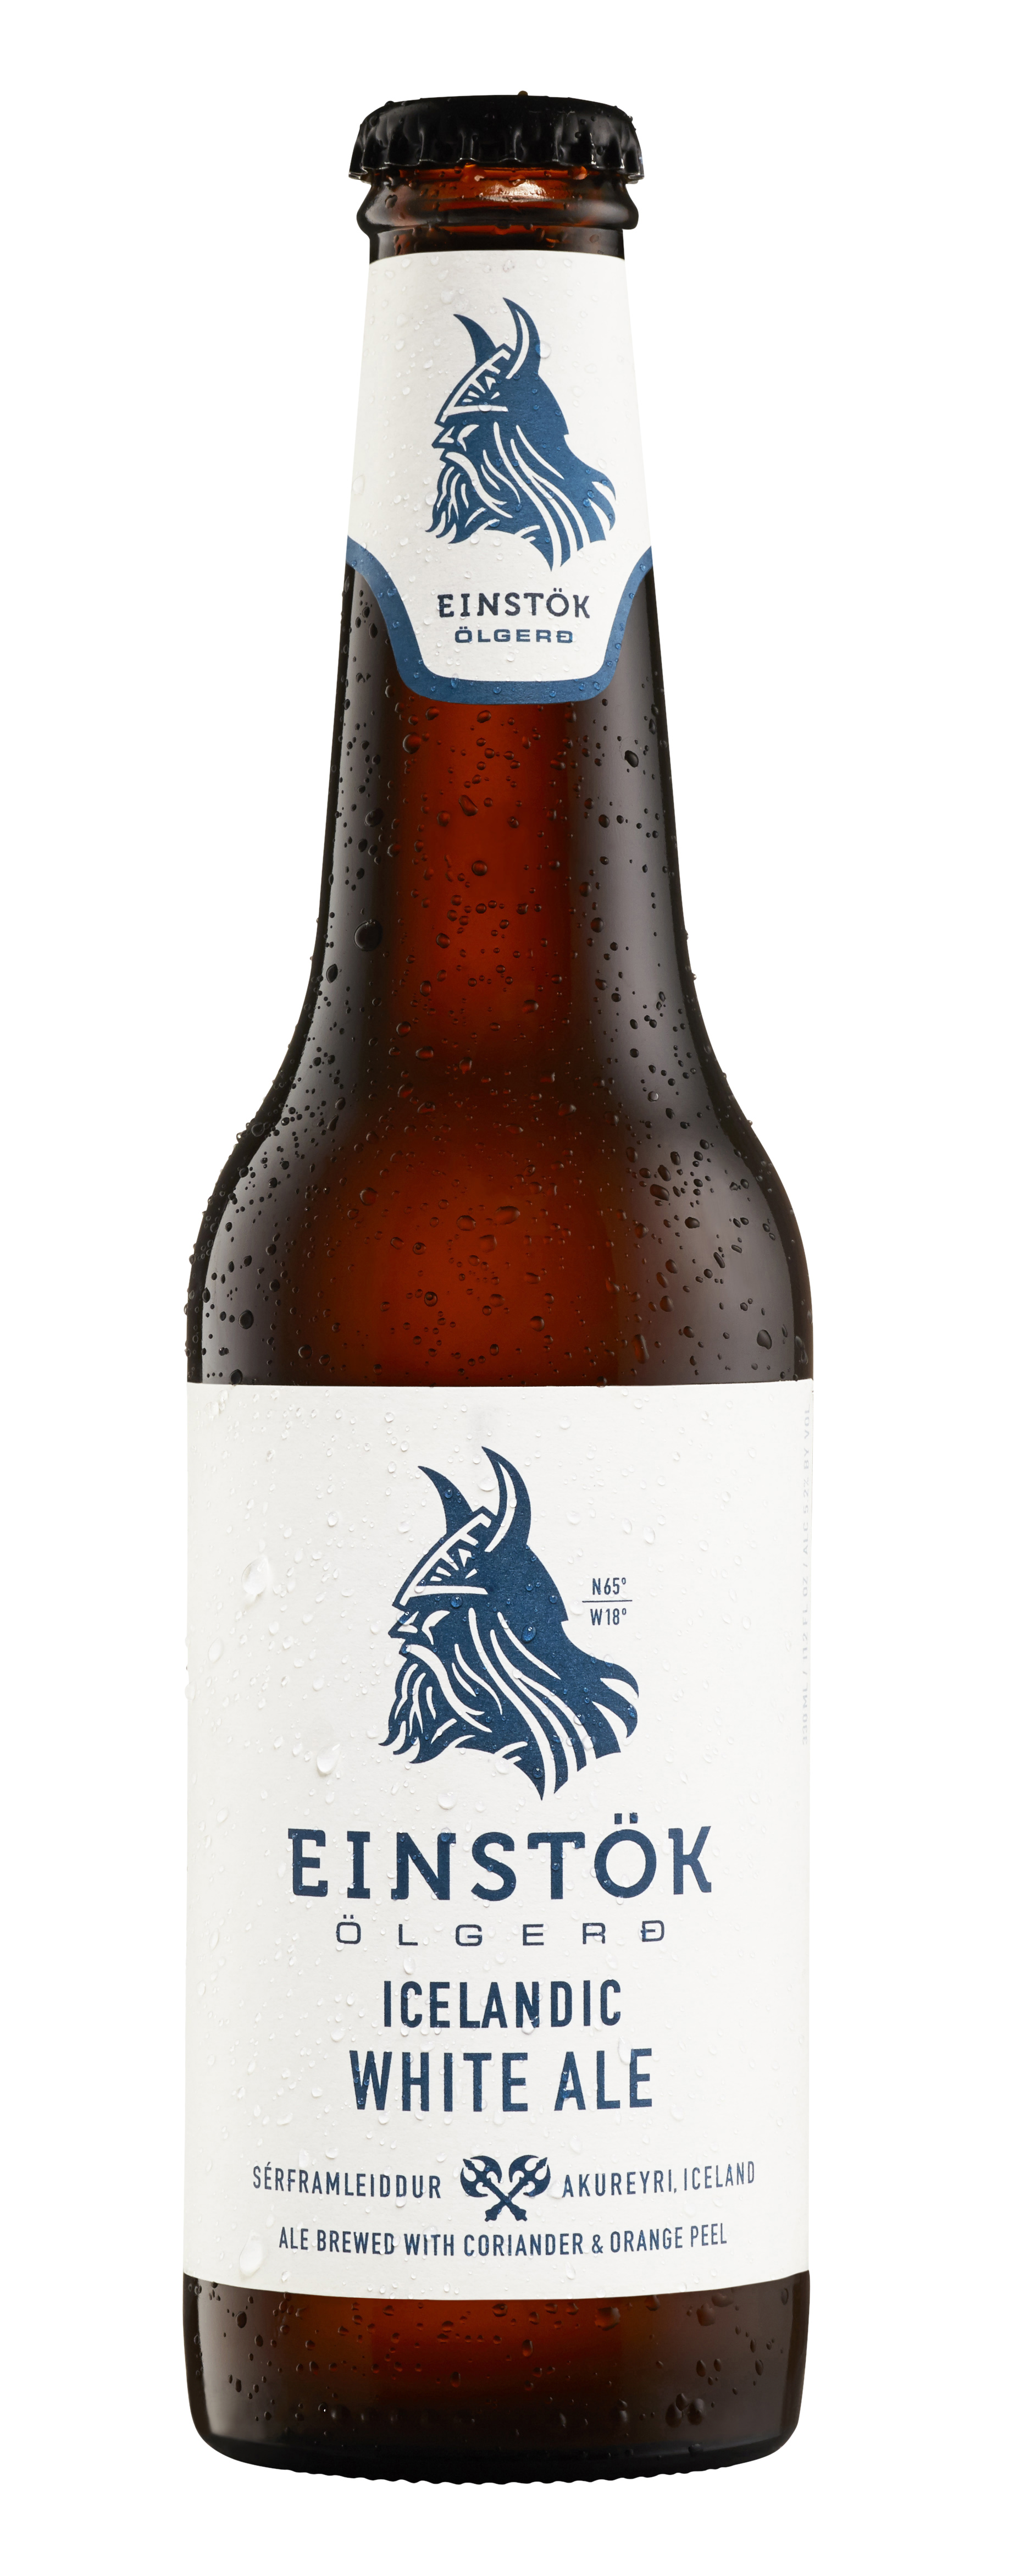 Einstök Icelandic White Ale is brewed to be the best in the world, with pure glacial water, coriander and orange peel.